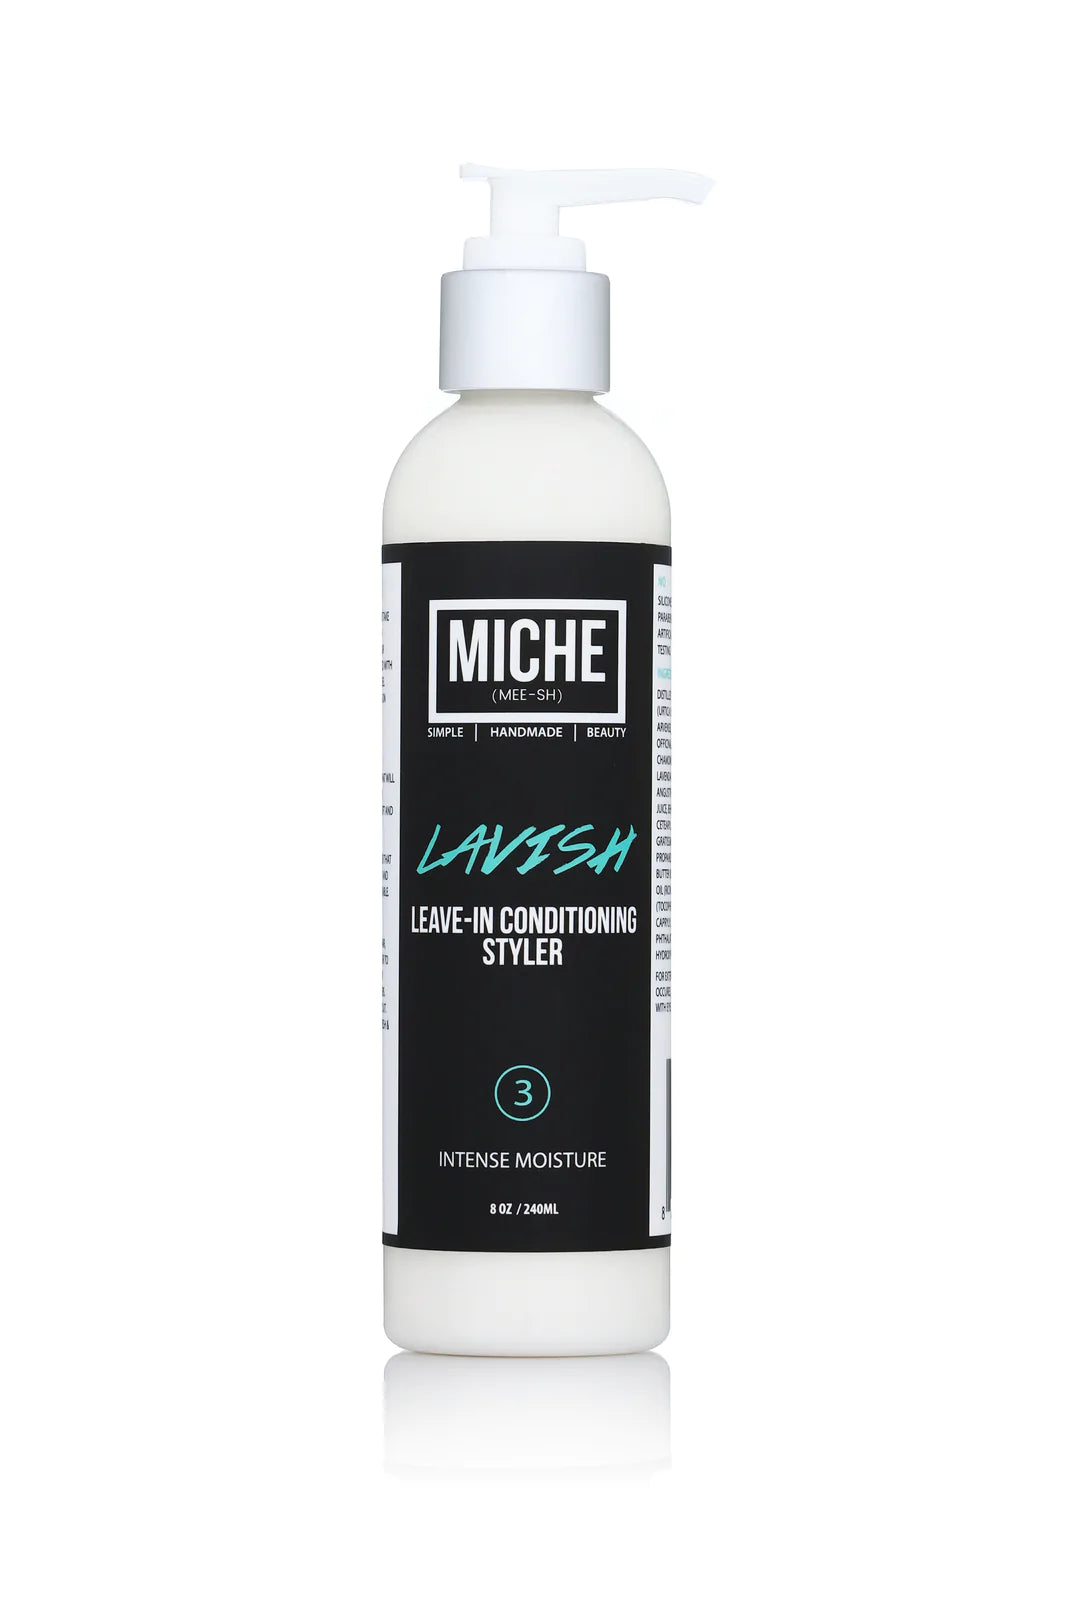 MICHE LAVISH Leave-In Conditioning Styler